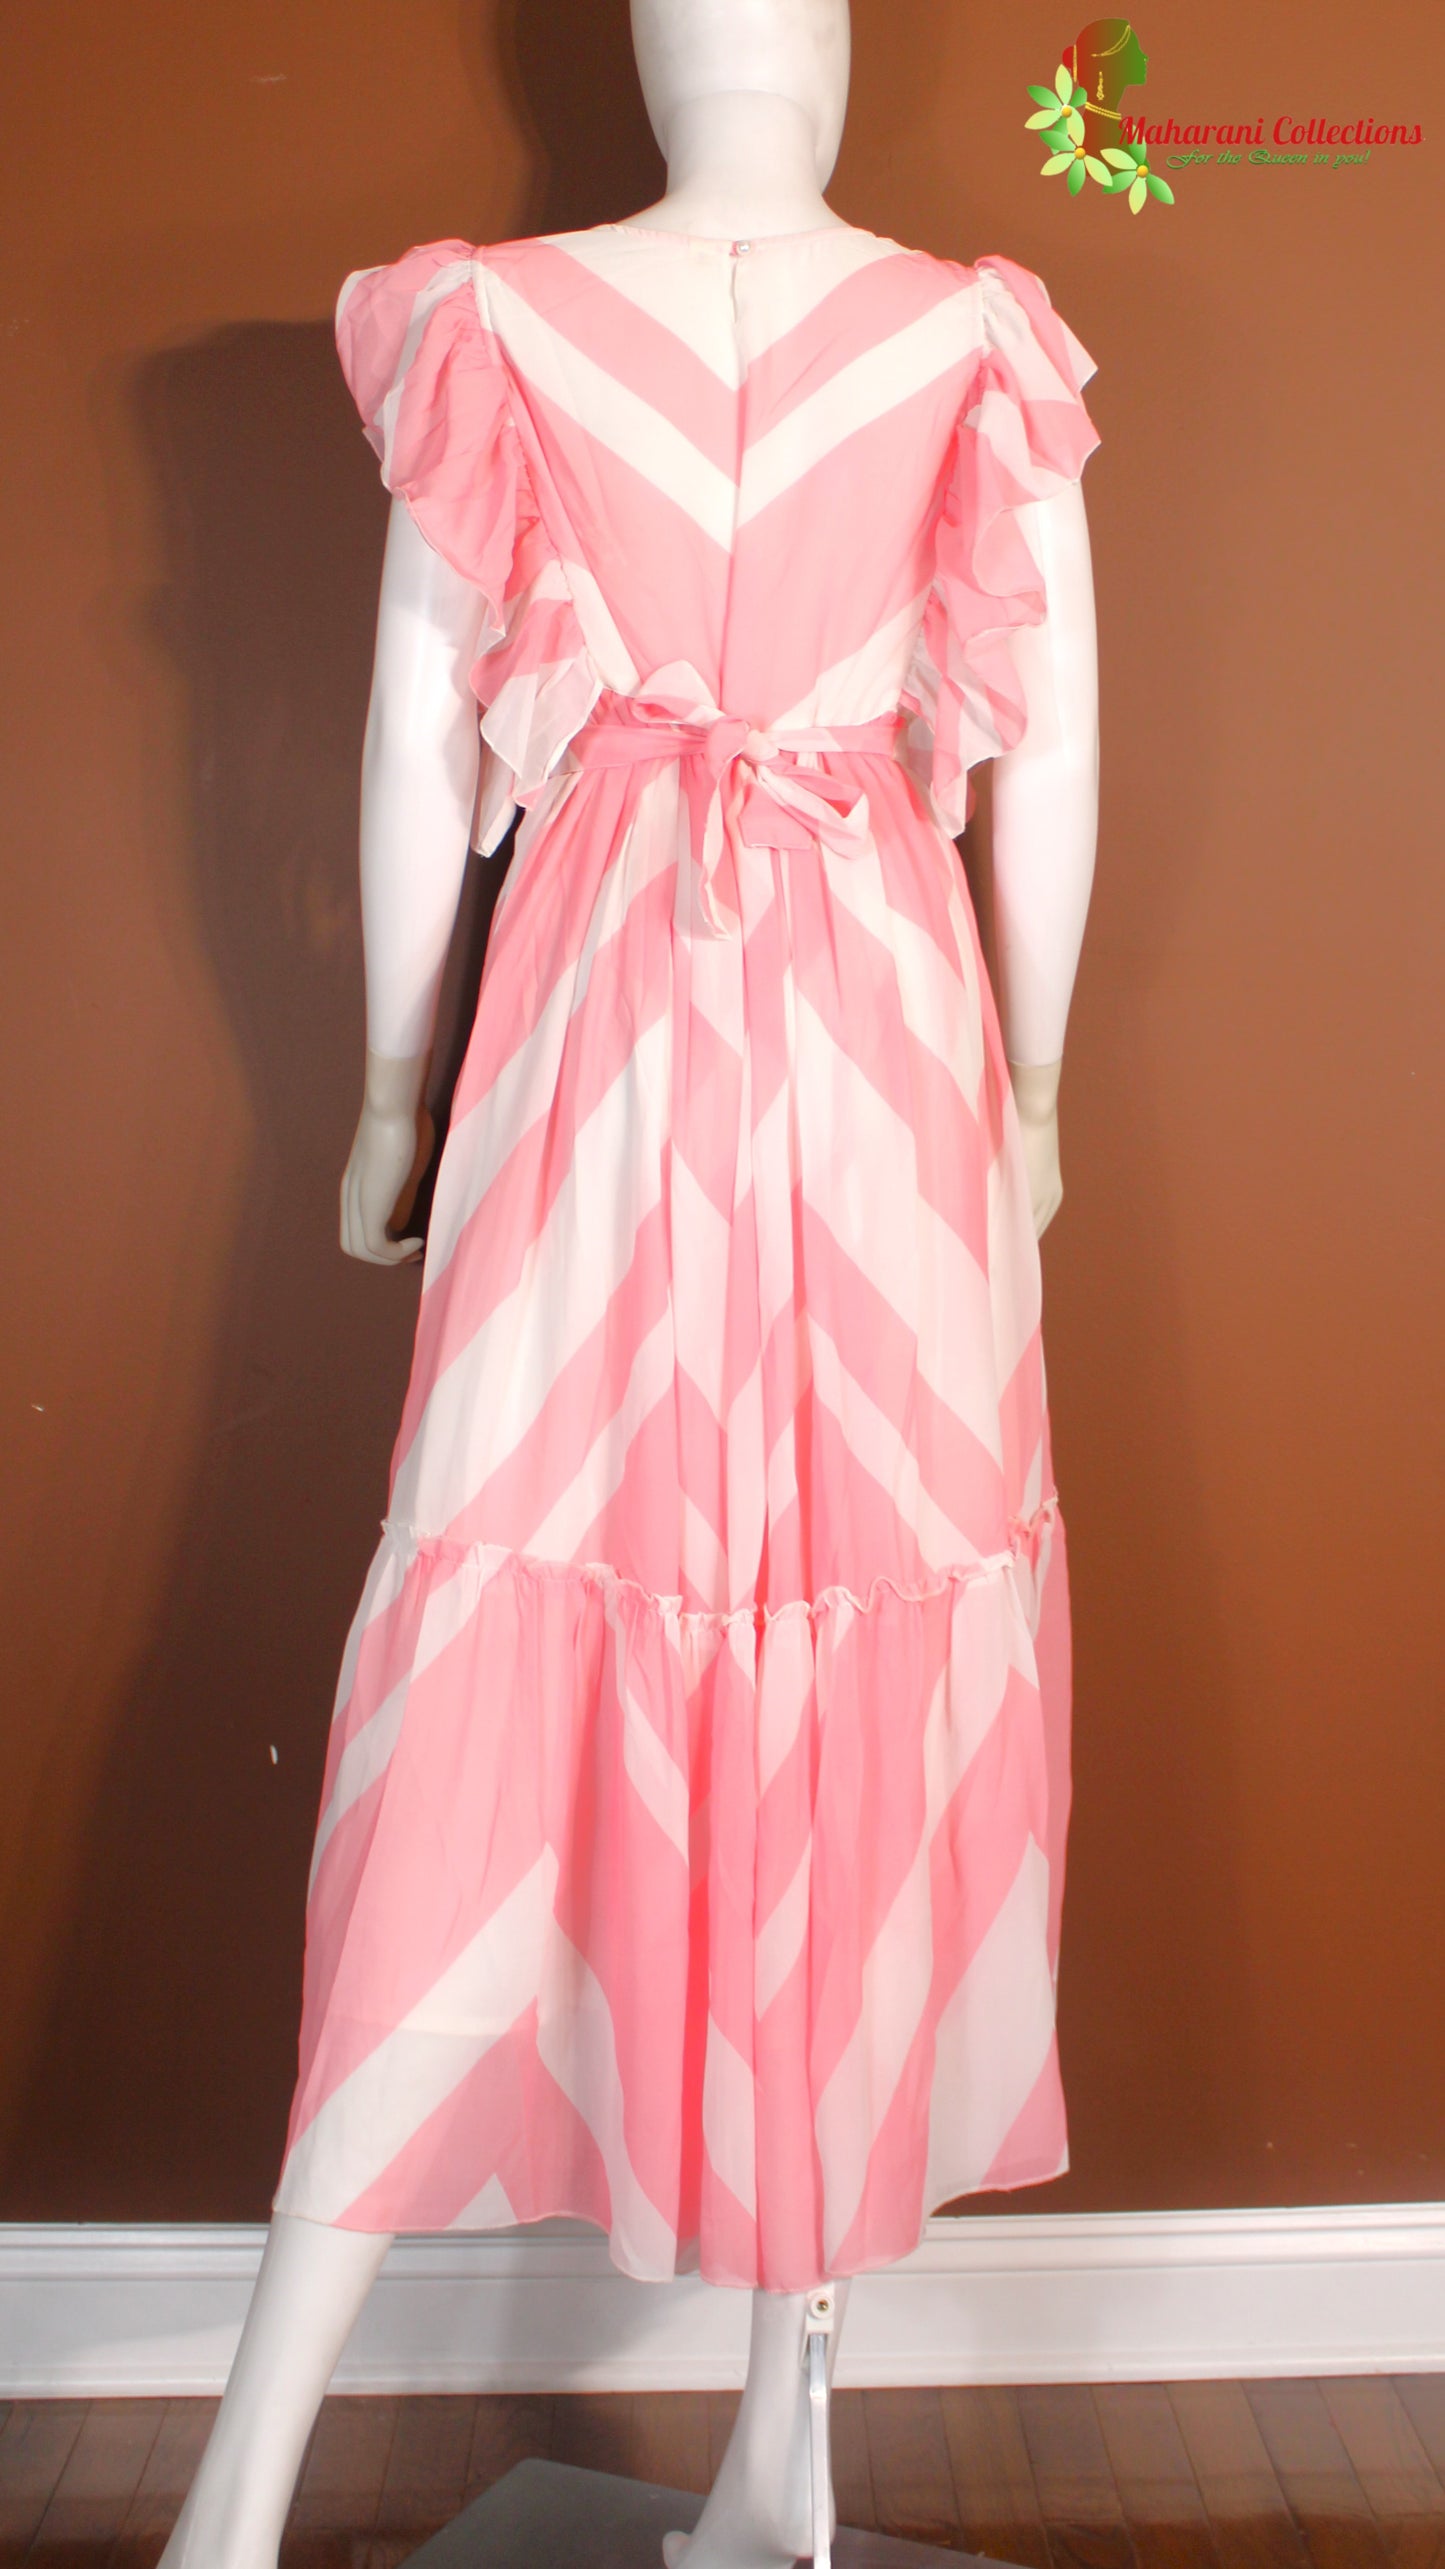 Maharani's Long Dress - Georgette - Pink and White (S, M, L, XL)